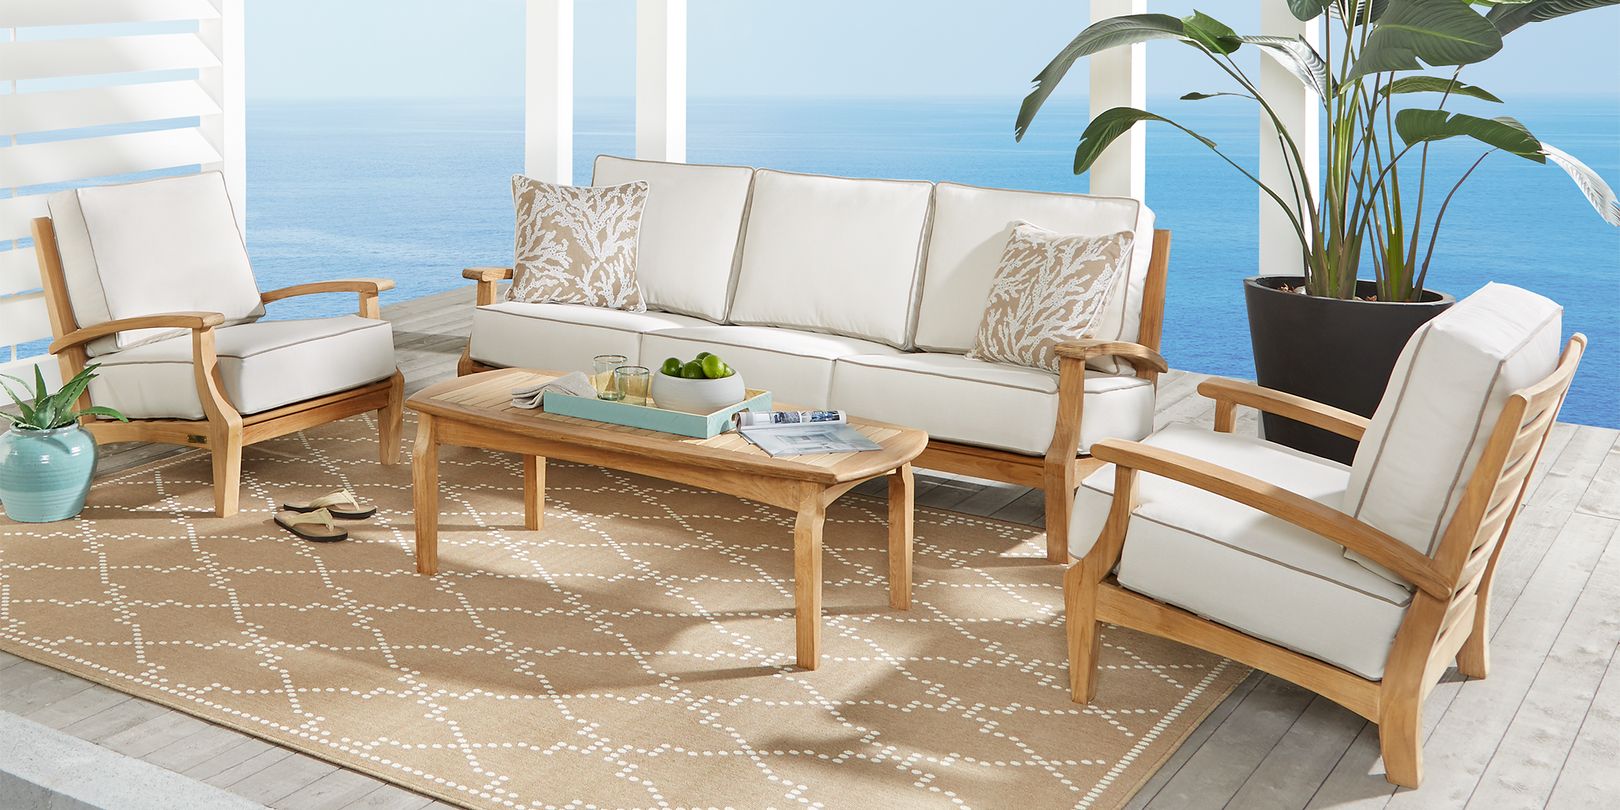 photo of a patio seating set on a deck near the water